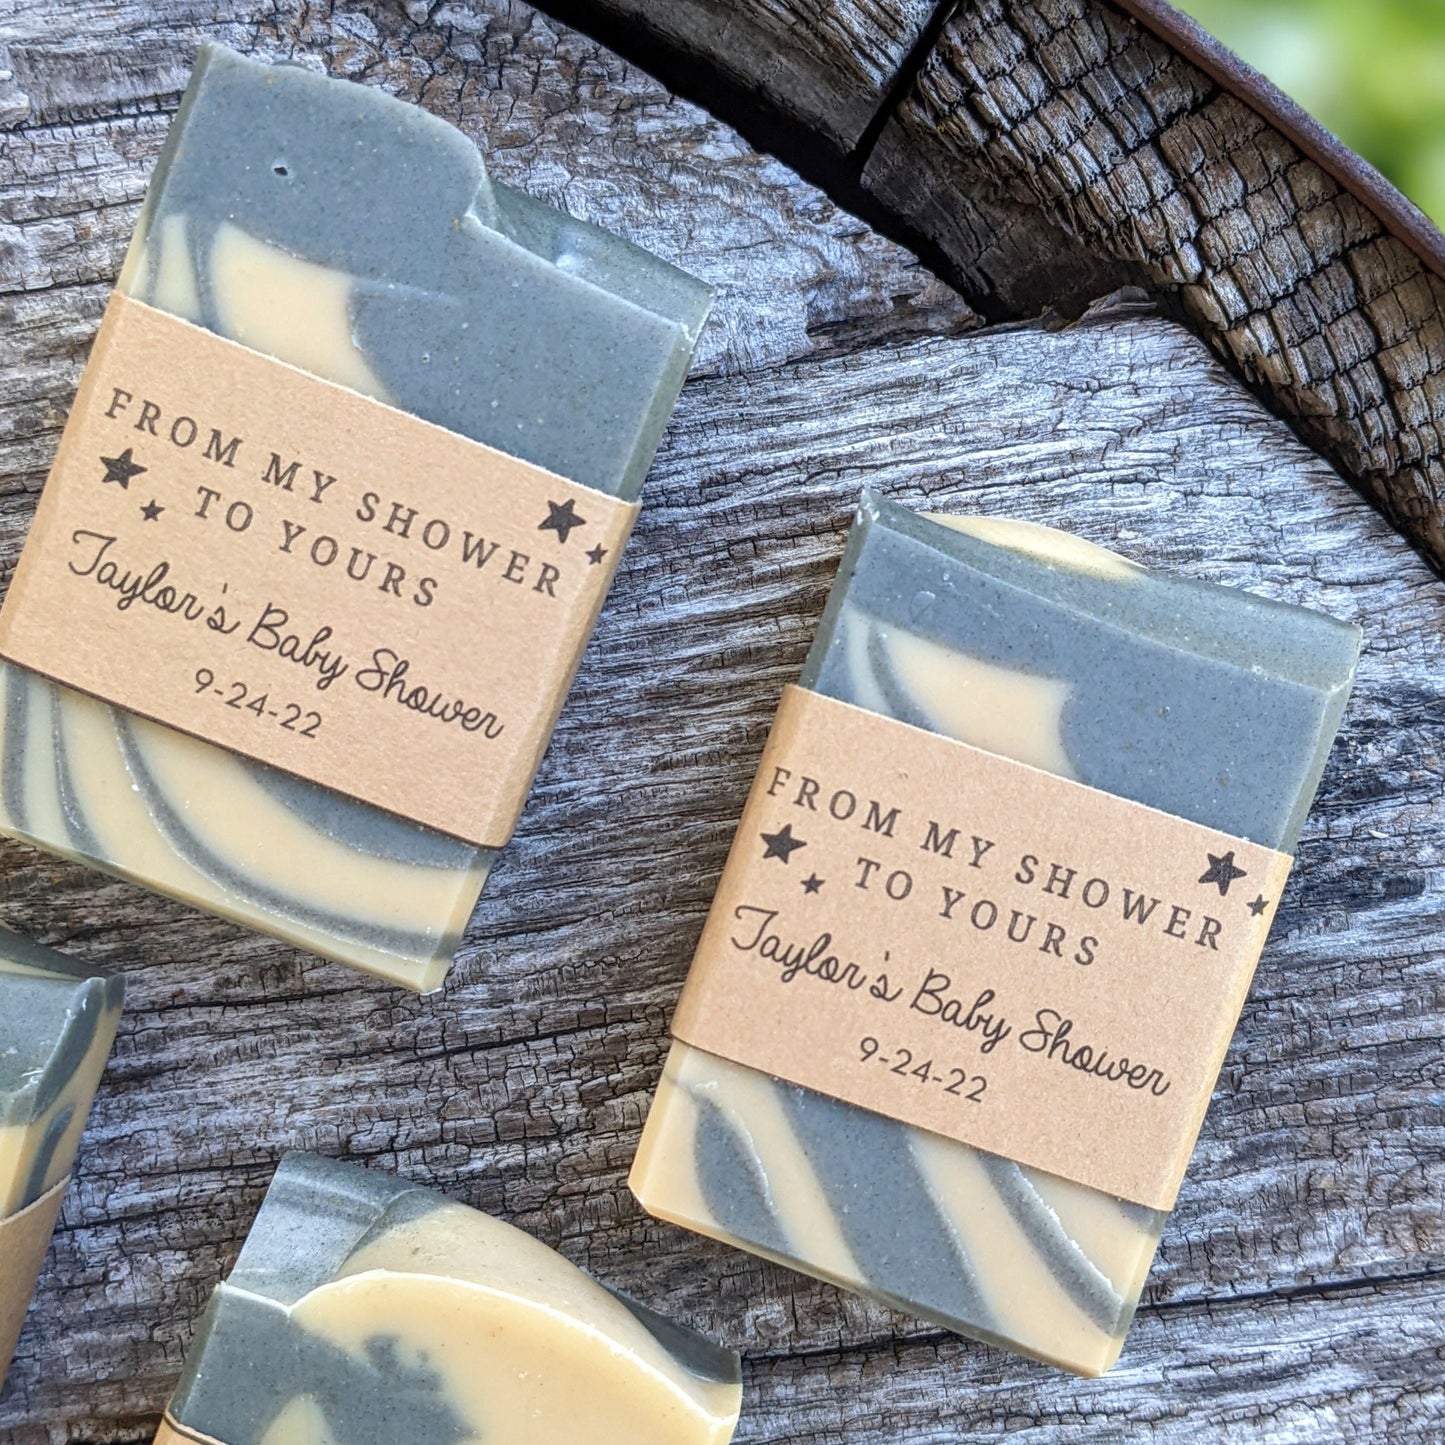 Set of 20 - Half Size (2 oz) Organic Soaps for Weddings, Showers, or Airbnb Guests